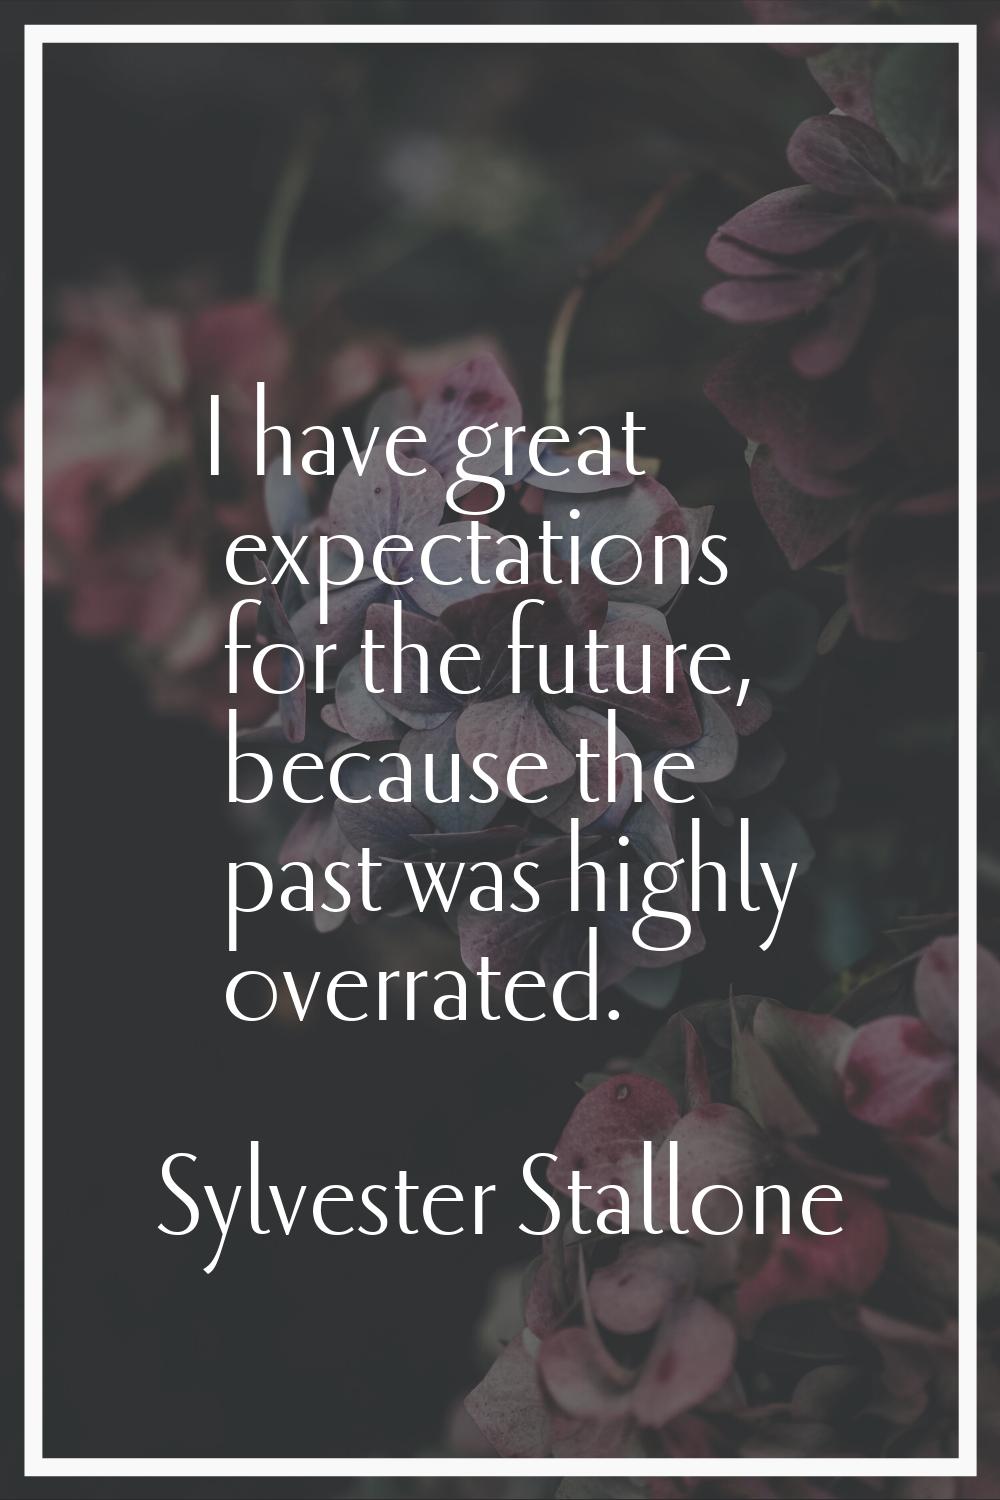 I have great expectations for the future, because the past was highly overrated.